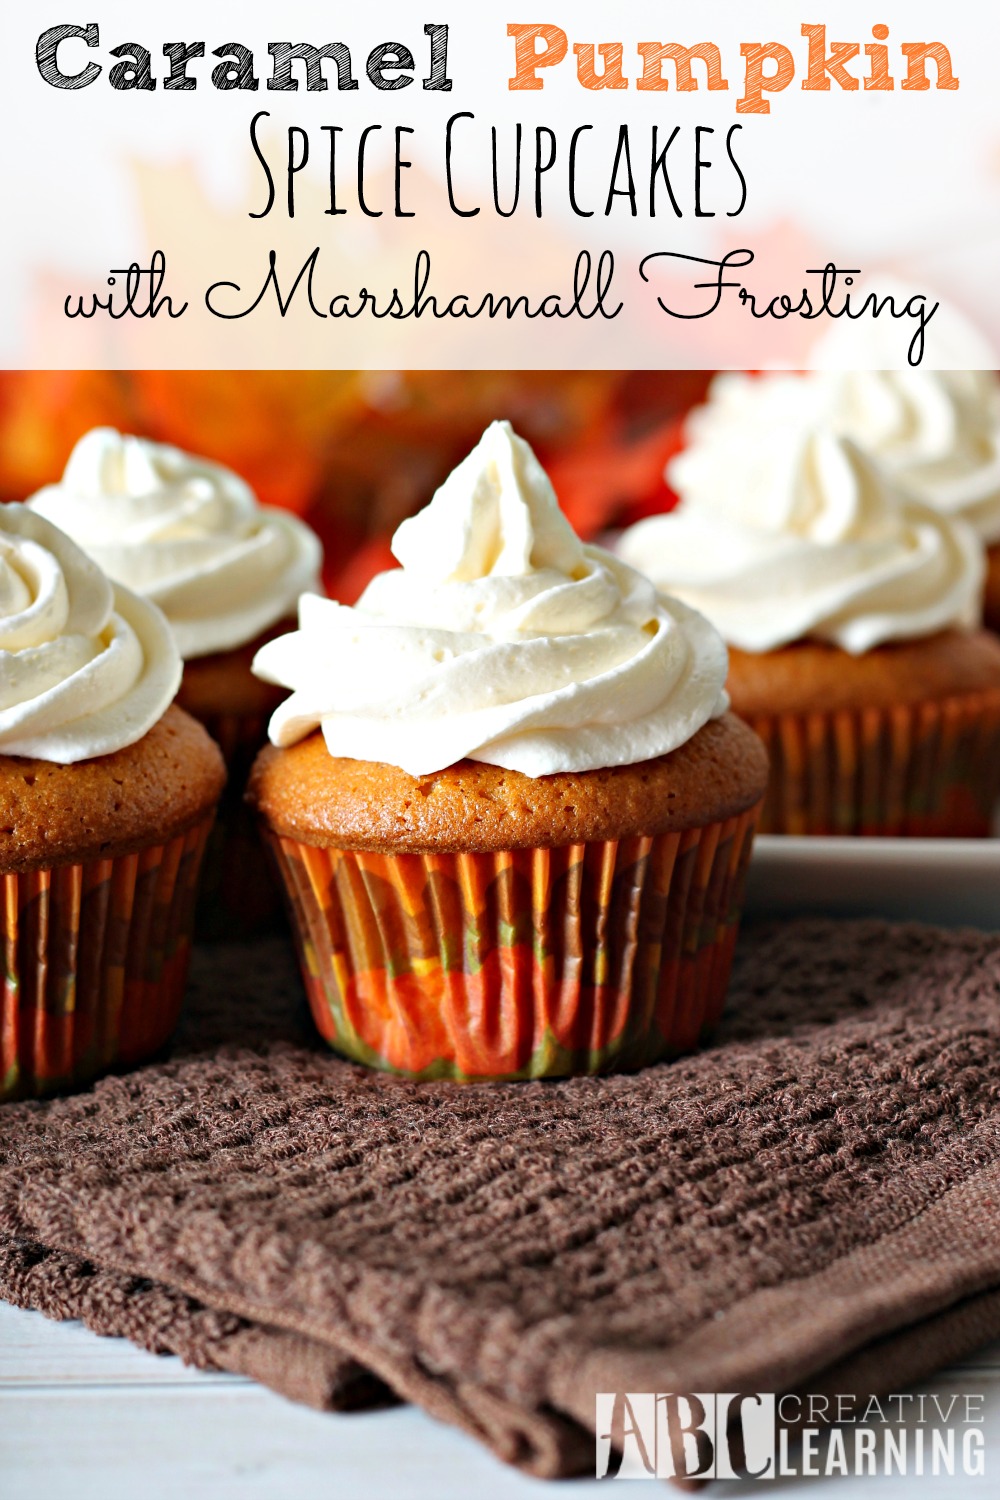 Caramel Pumpkin Spice Cupcakes with Marshmallow Frosting - simplytodaylife.com